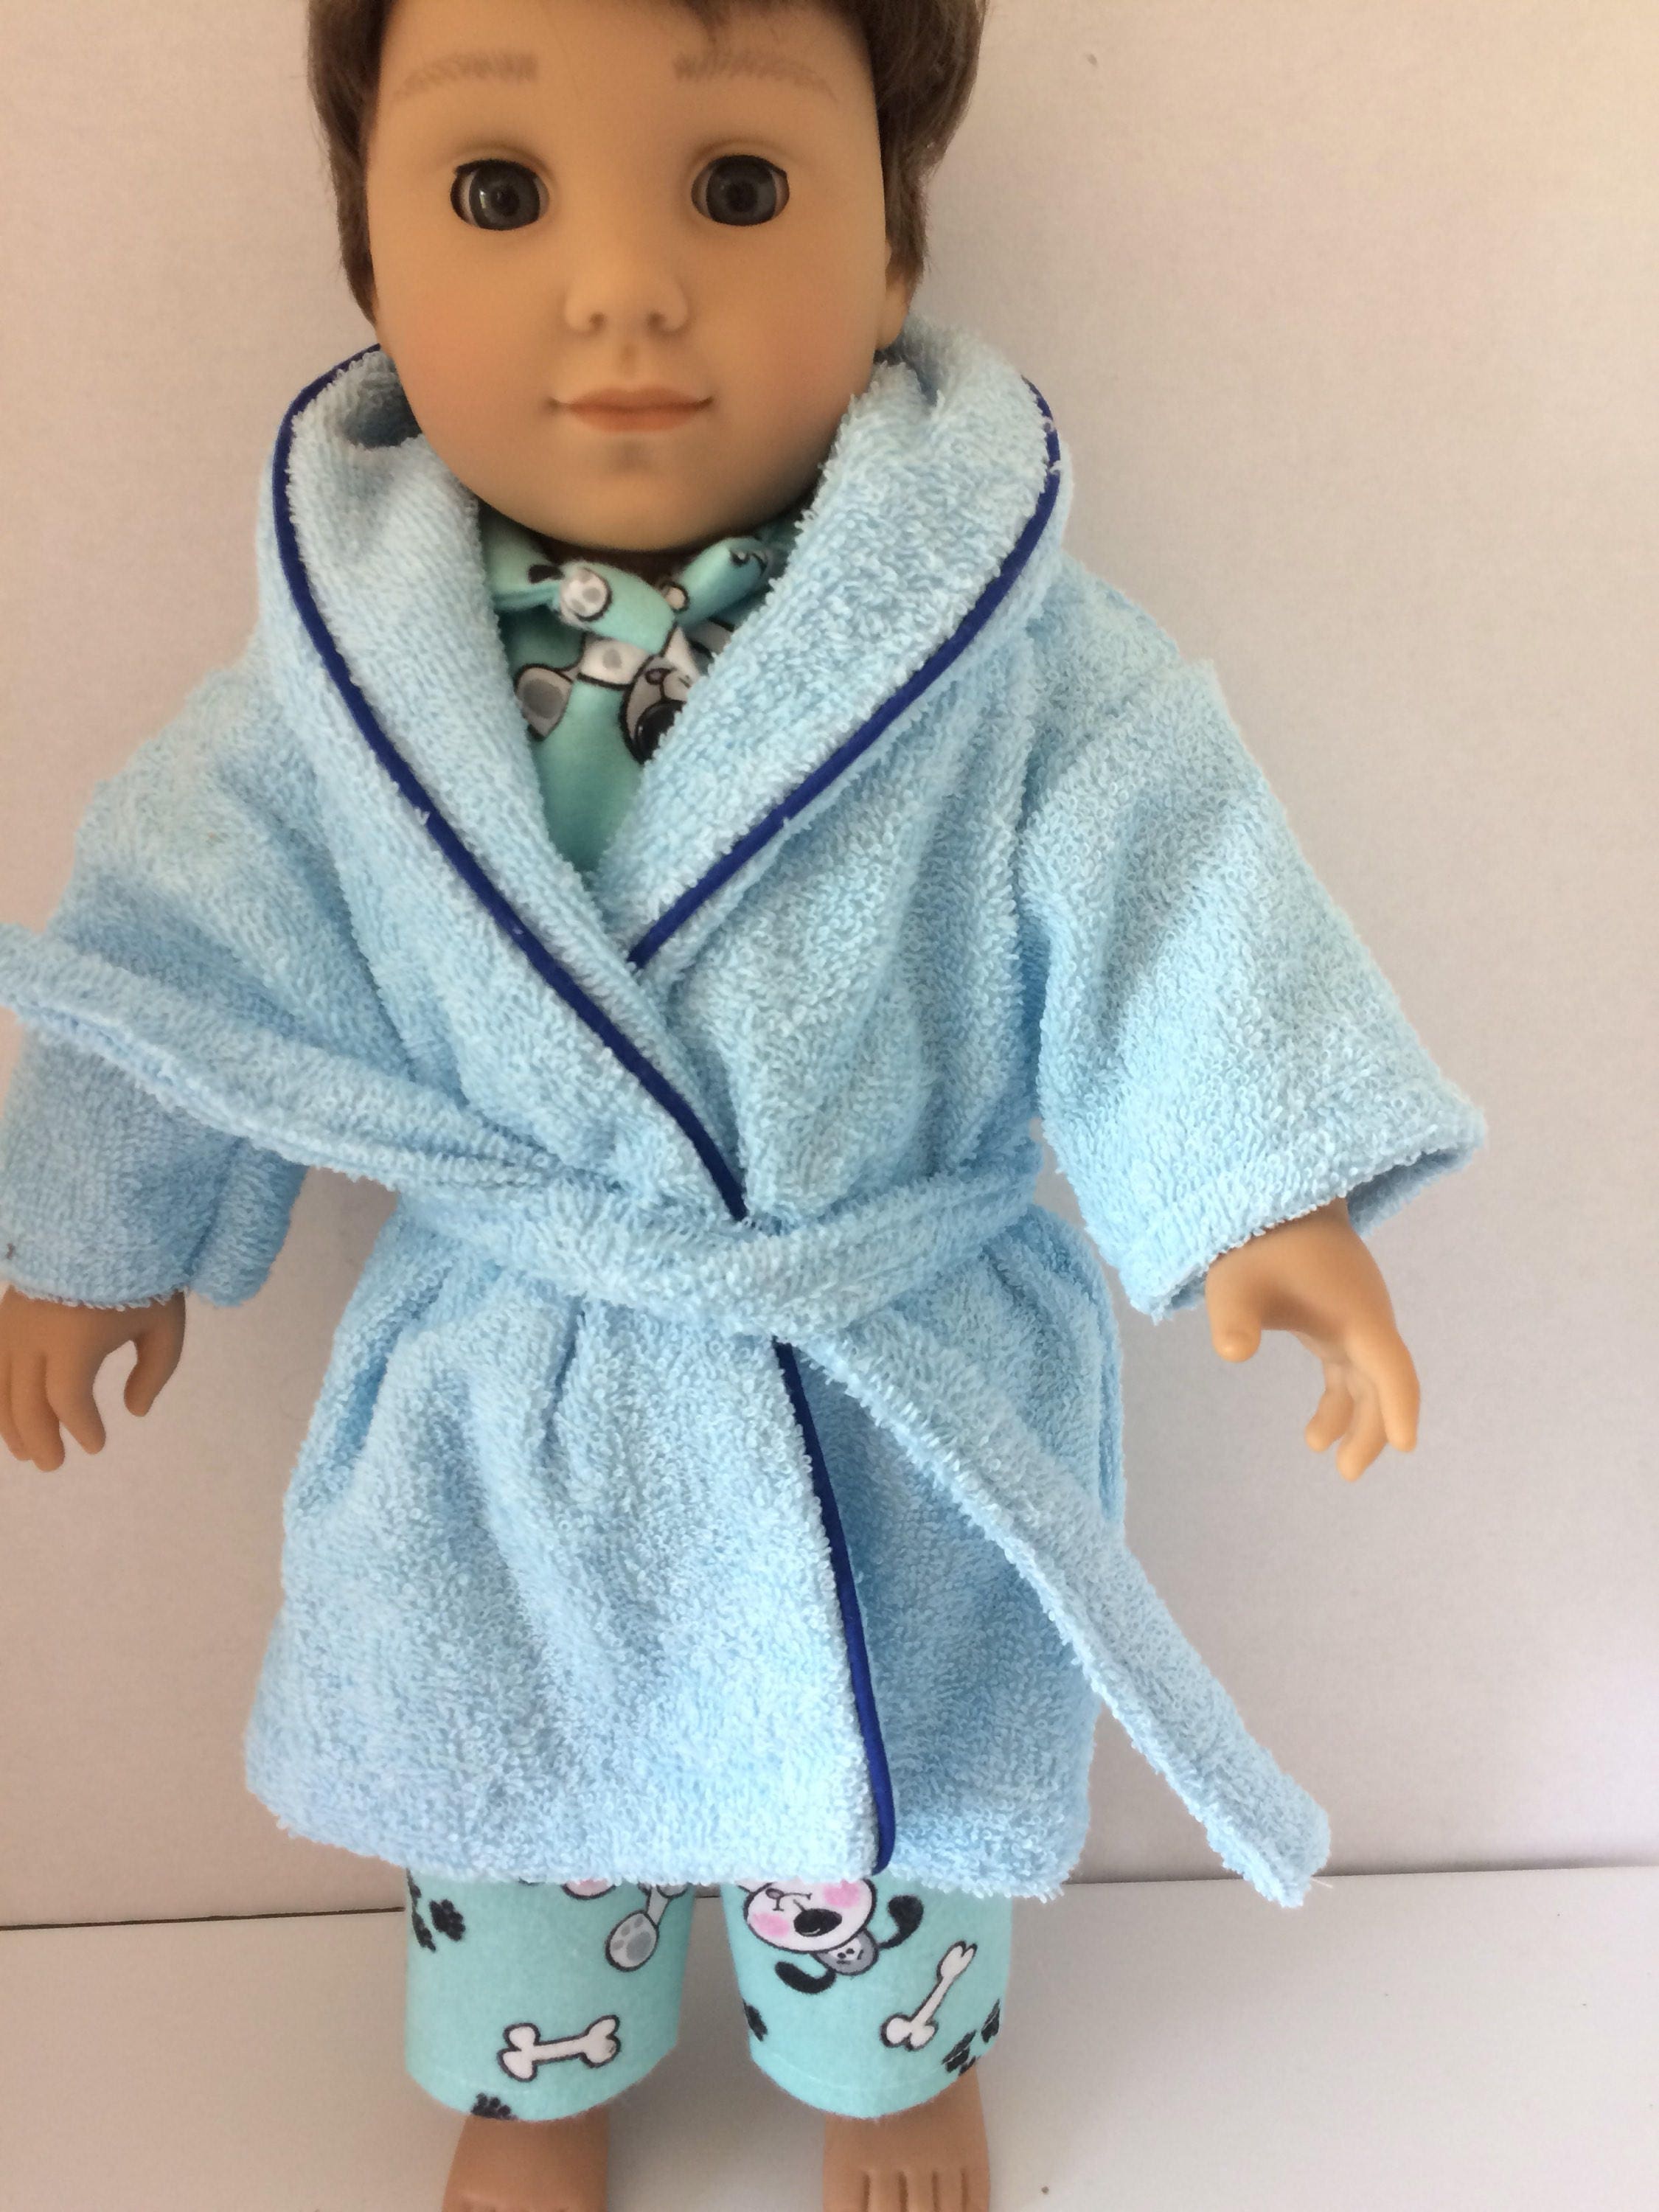 American Girl Reindeer Robe for Girls Size 5-6 and Matching 18